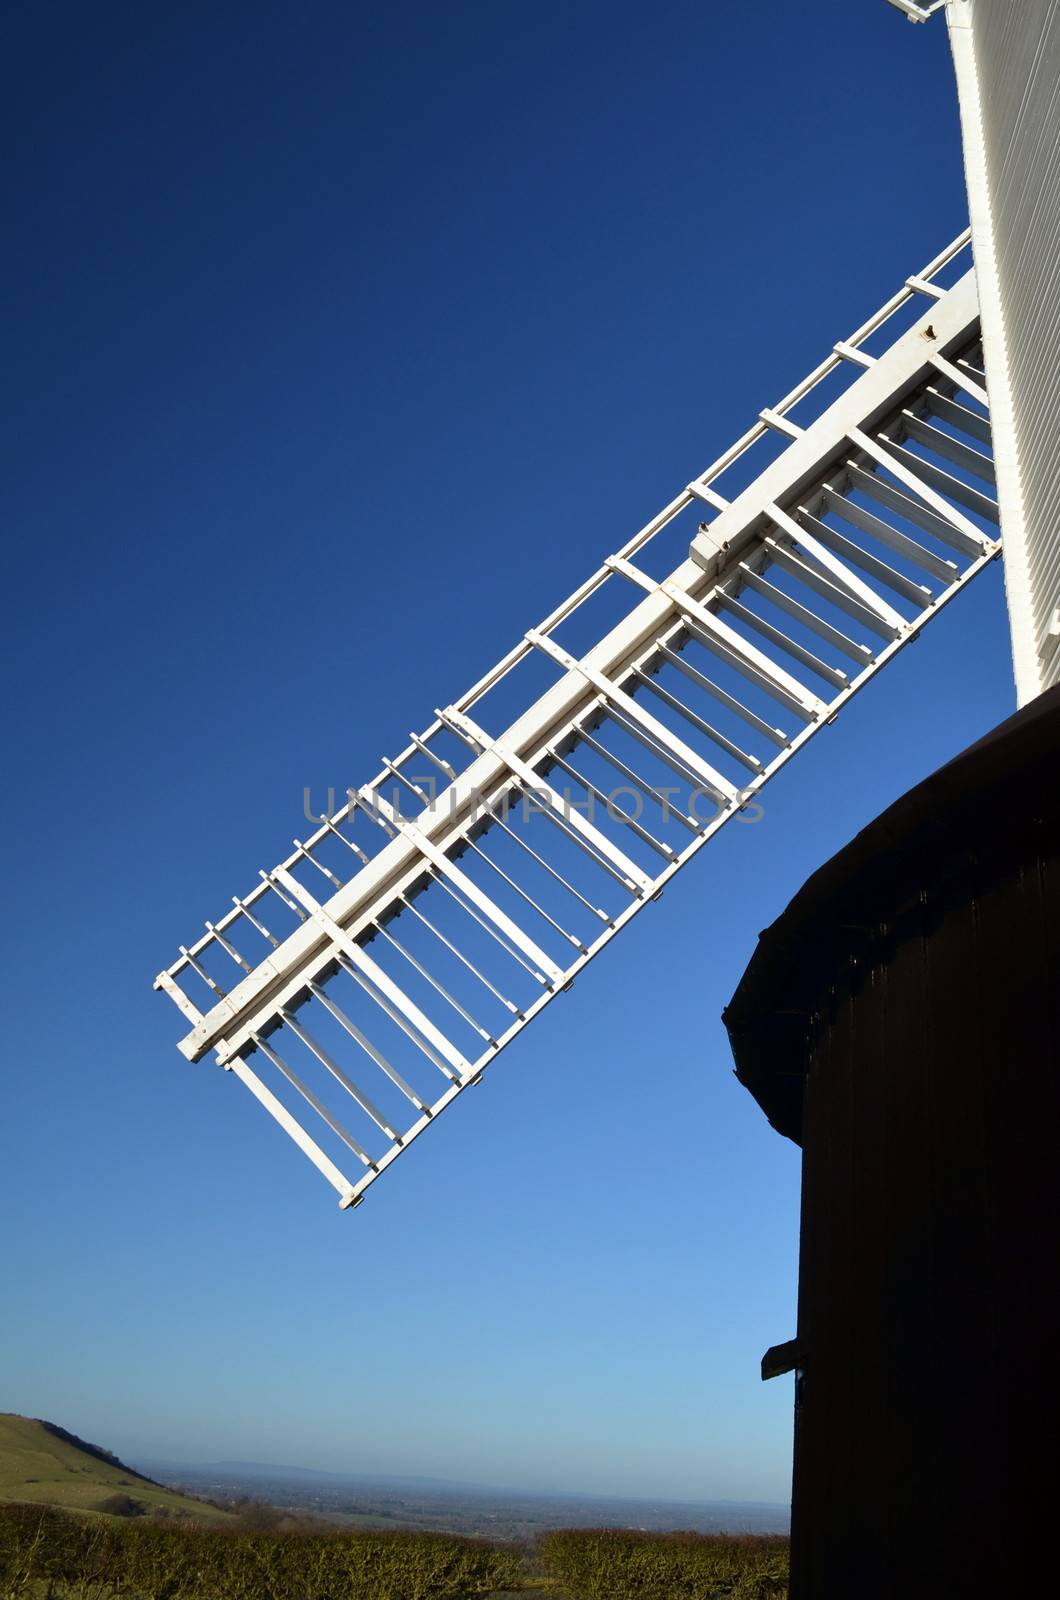 Close view of a traditional English windmill showing one of its sweeps overlooking the South Downs in the County of Sussex,England.